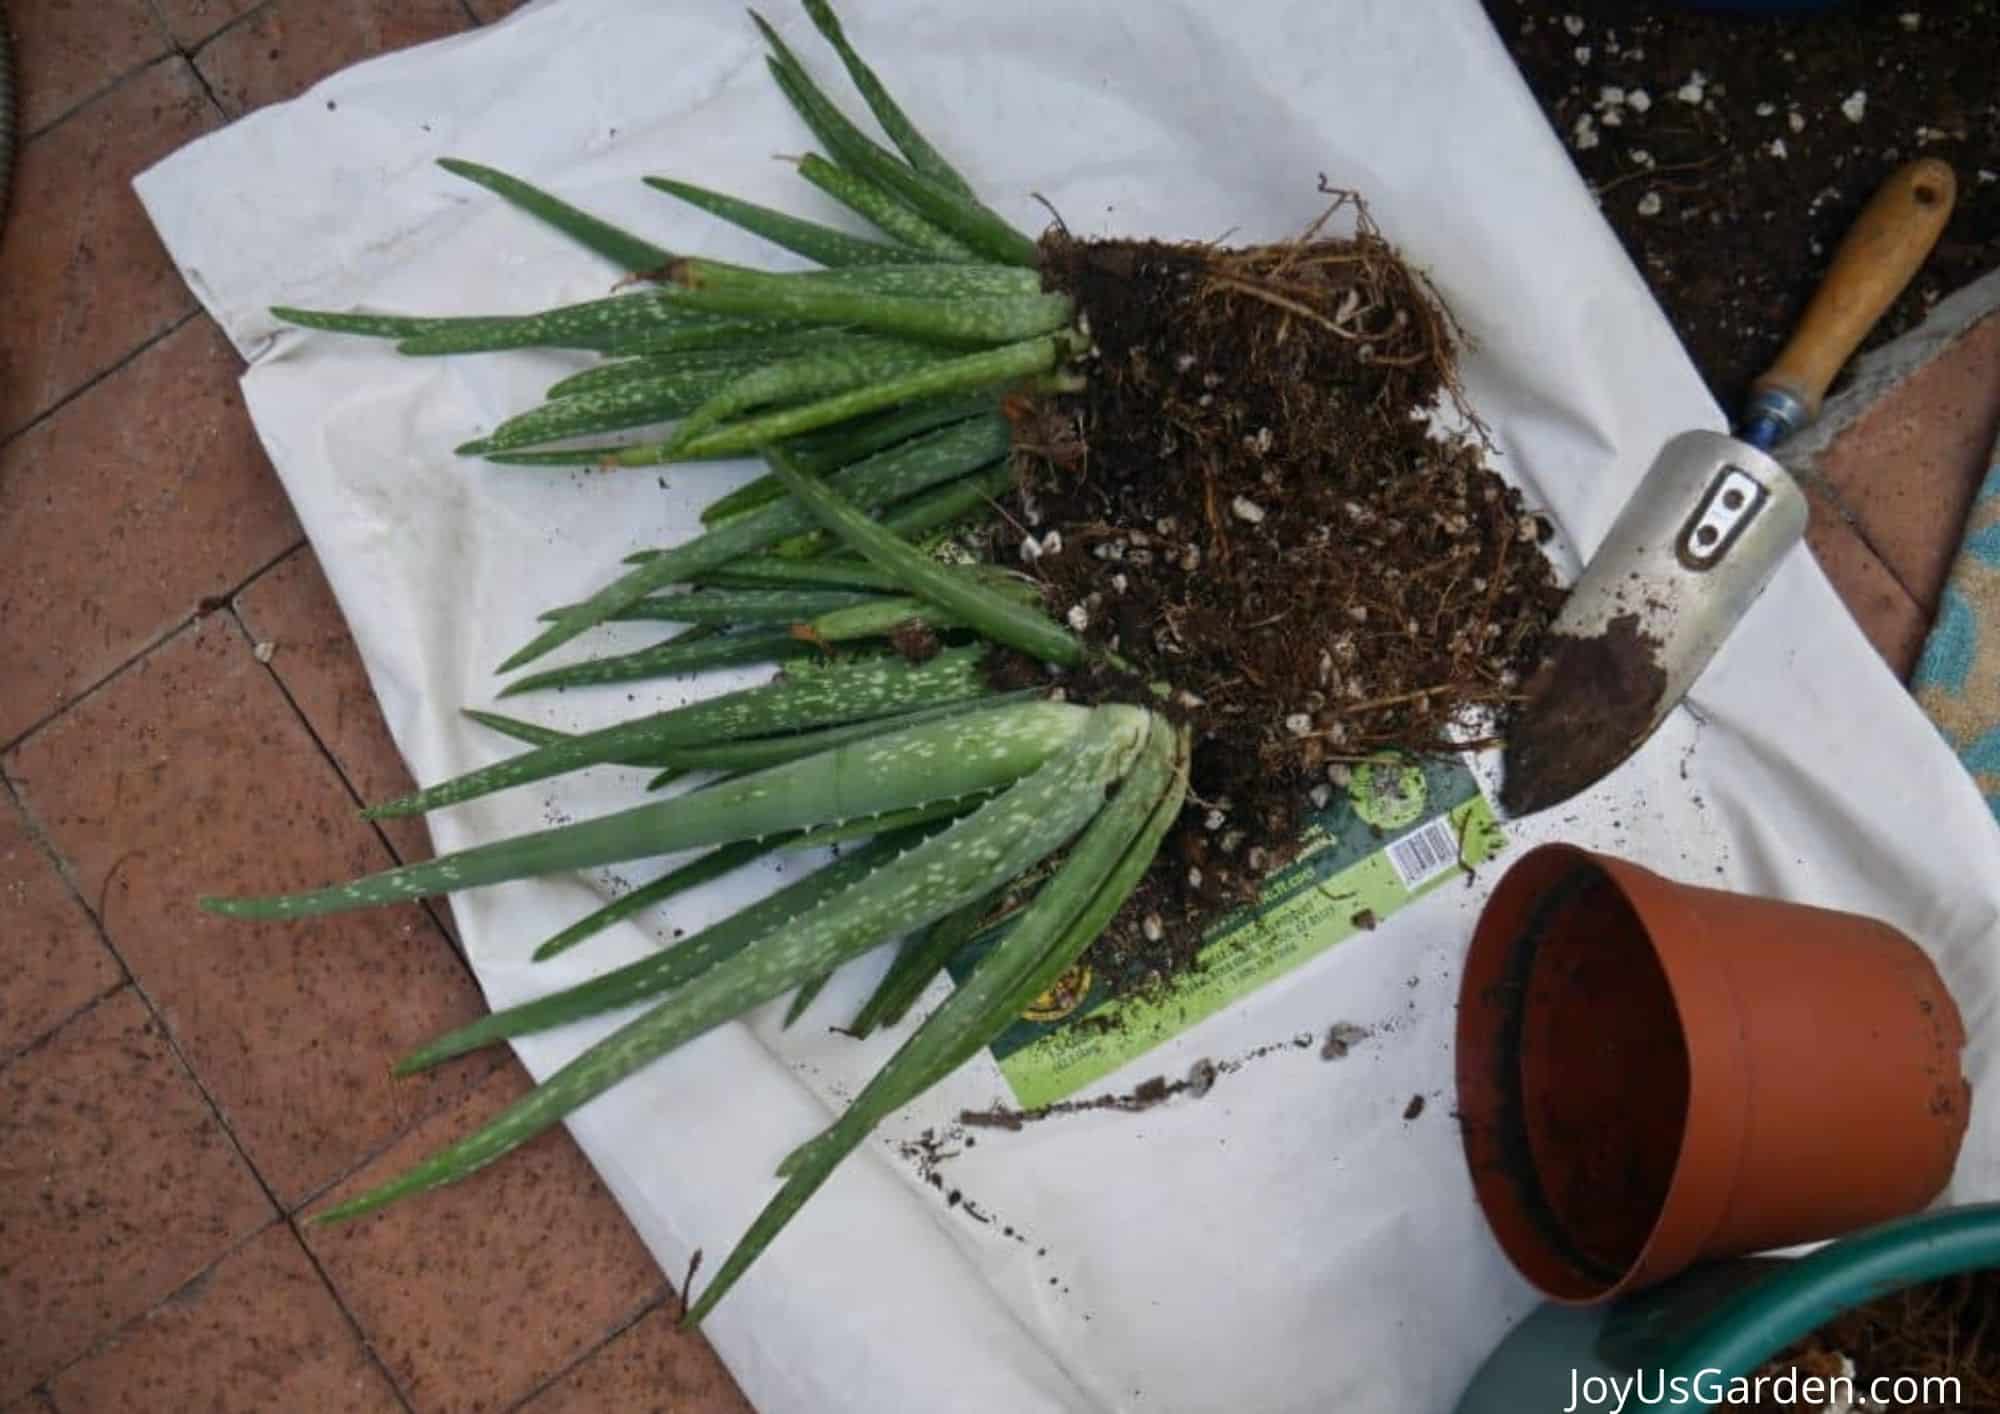 Aloe Vera pups that are laying on top of bag of soil with plastic grow pot and hand trowel shown. 